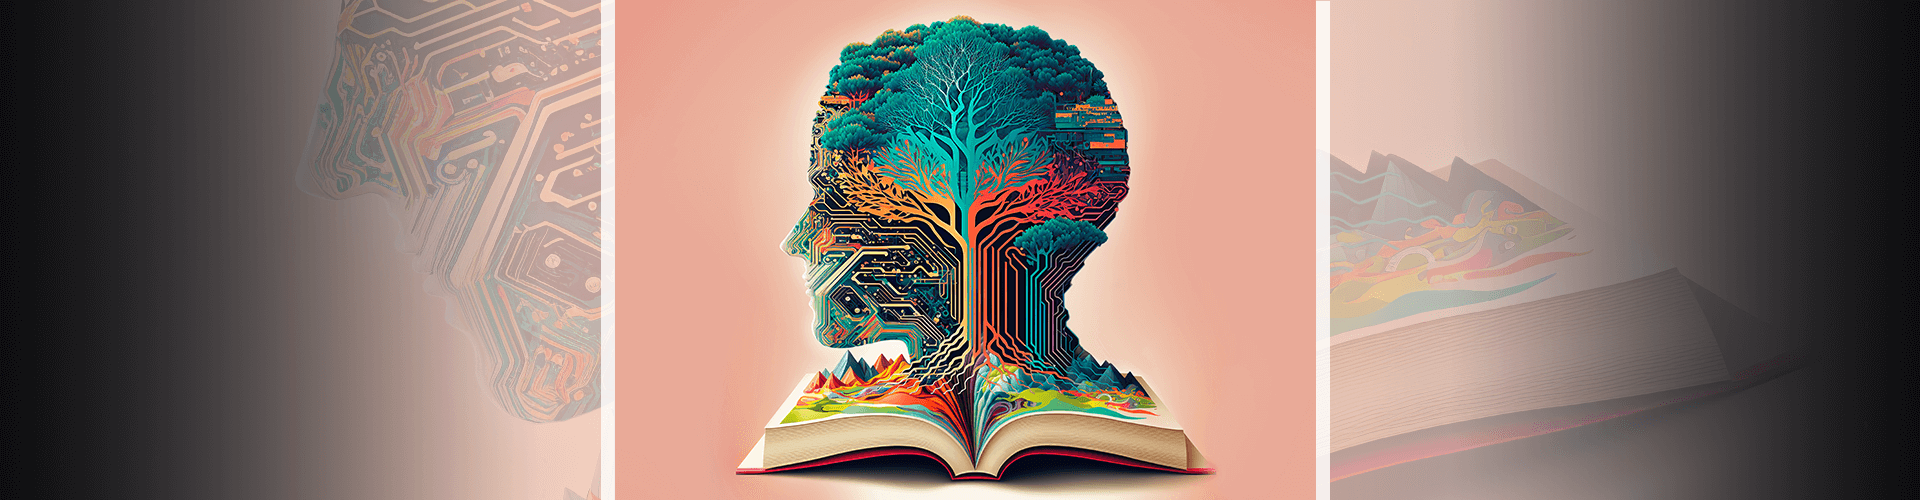 Illustration of human head filled with tree design coming out of an open book